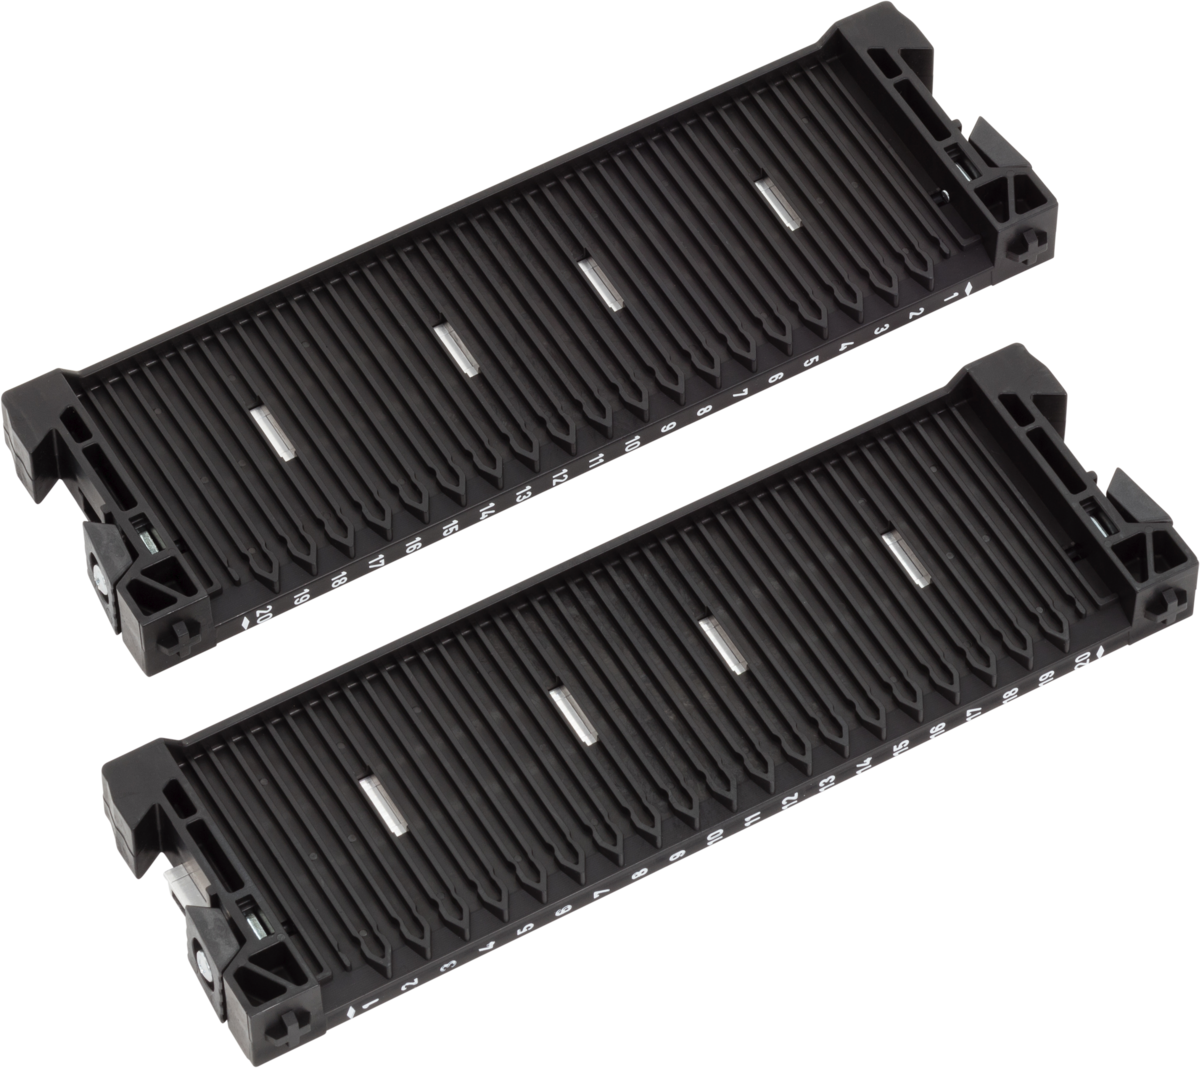 Anti-Static-ESD-Antistatic-Rack-System-for-Printed--Circuit-Boards-Slotted-wall-pair 300-Ref.-2510.000.992_1004205_255x80x13,5_01